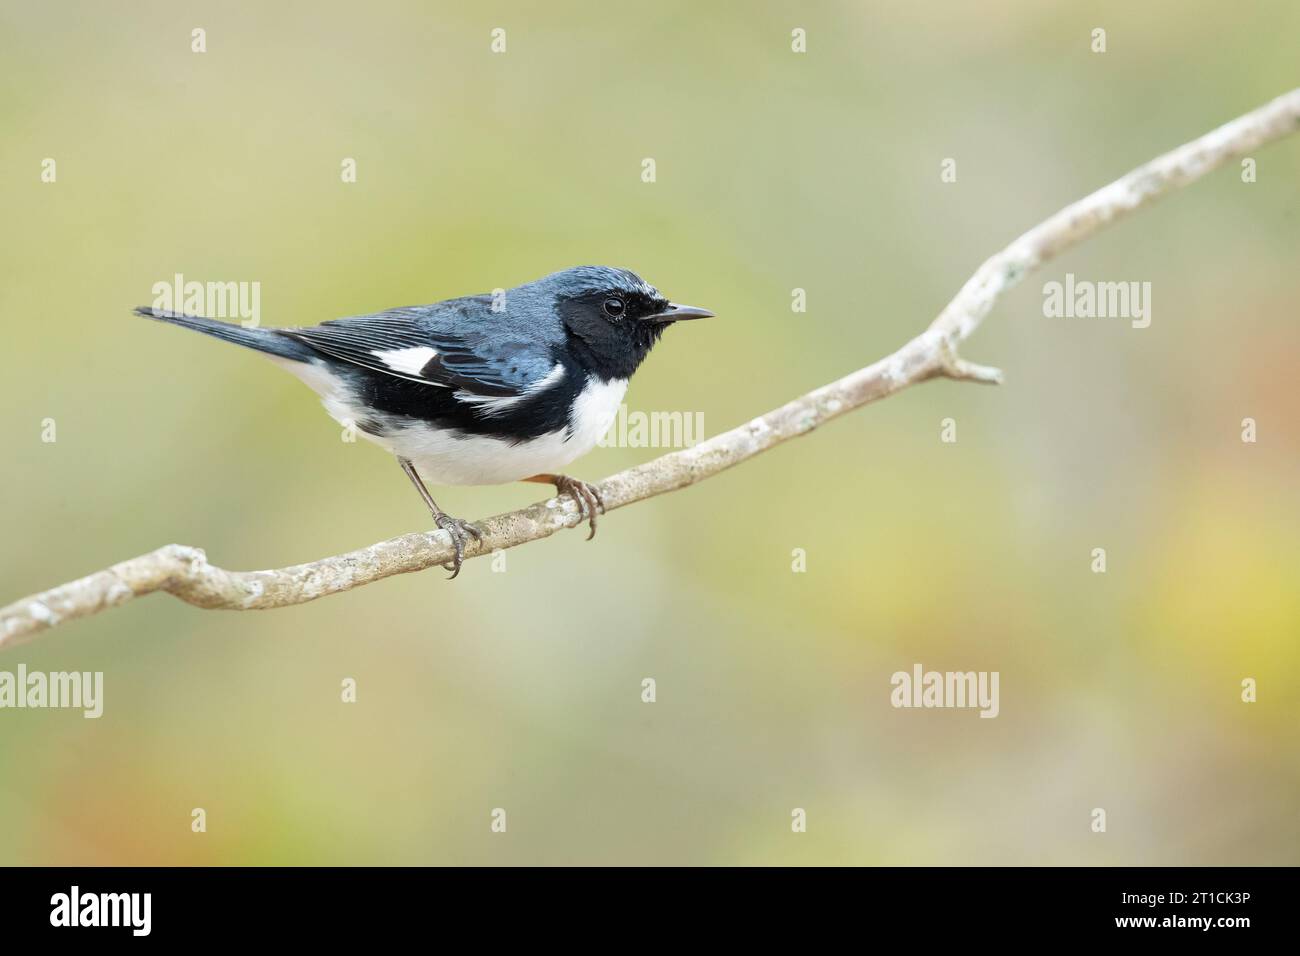 Black-throated blue warbler (Setophaga caerulescens) is a small passerine bird of the New World warbler family. Stock Photo